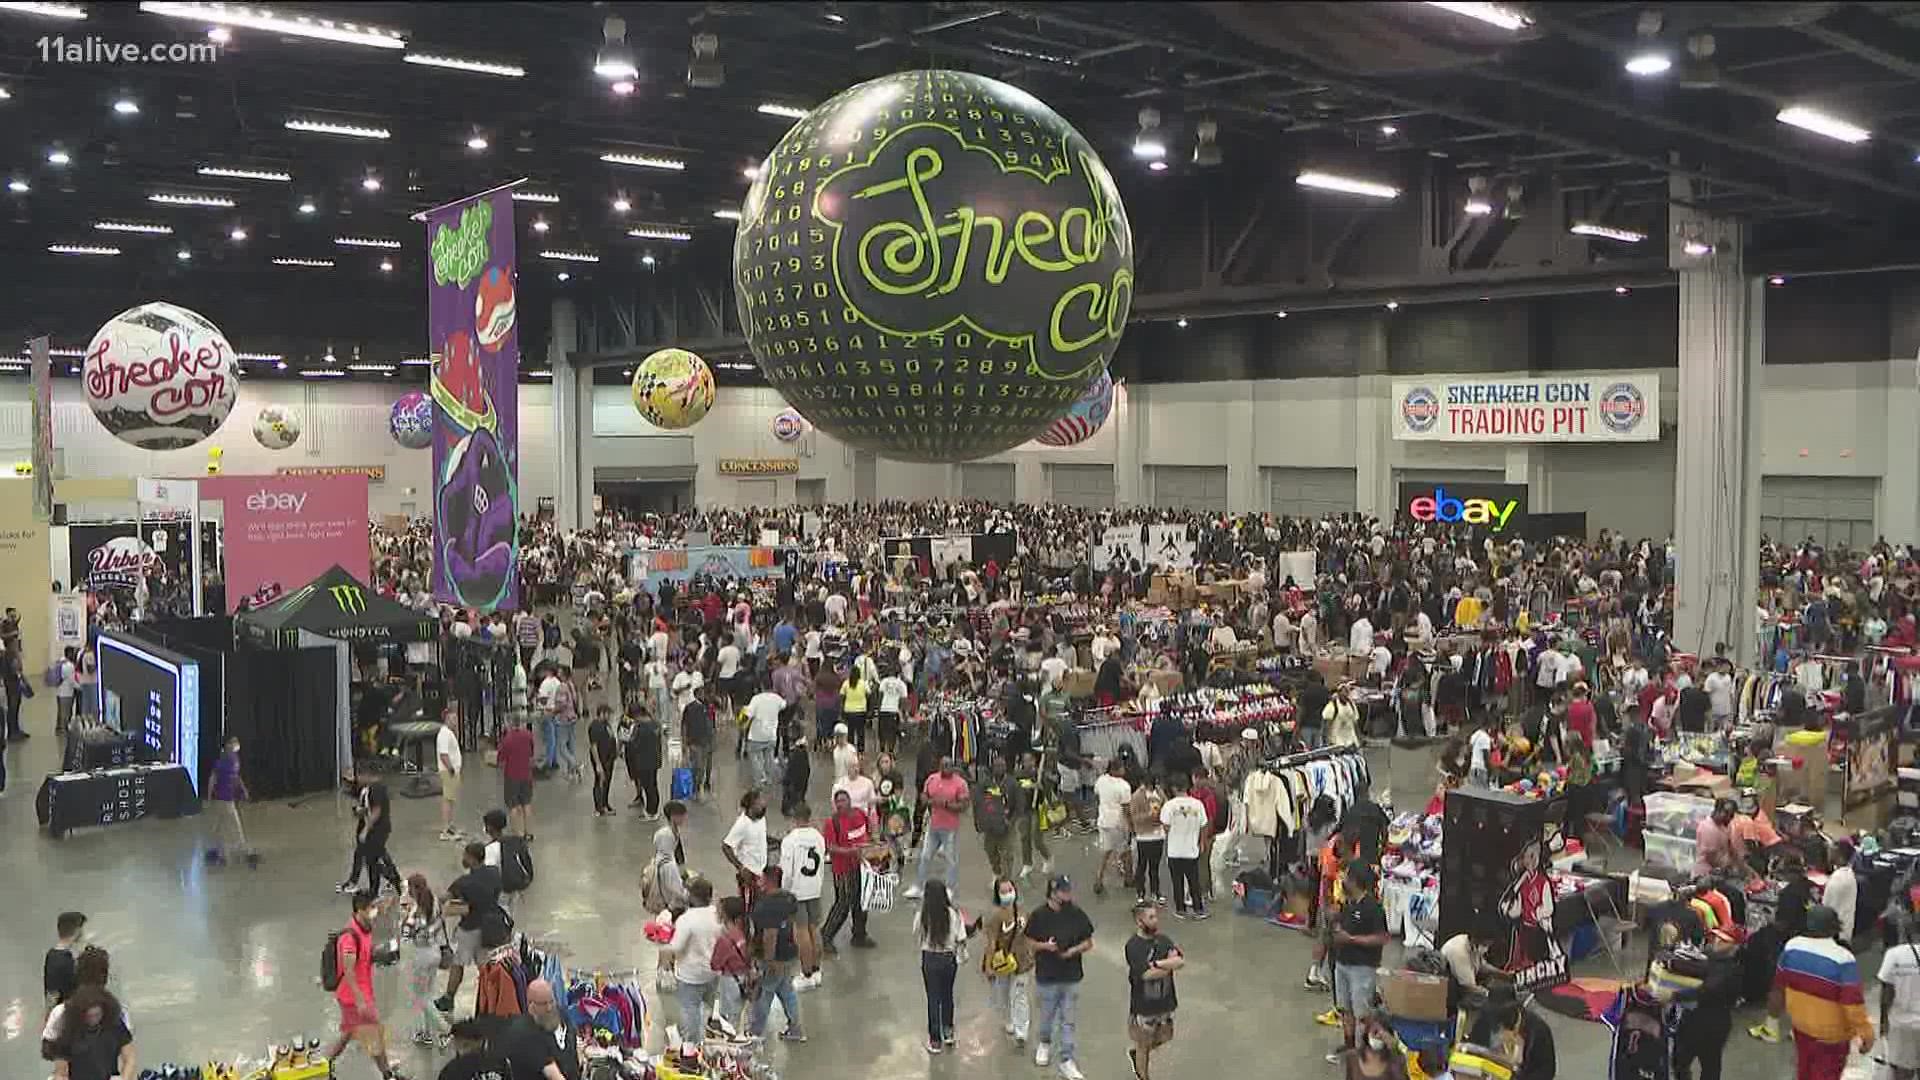 For sneaker heads, Atlanta Sneaker Con was exciting.